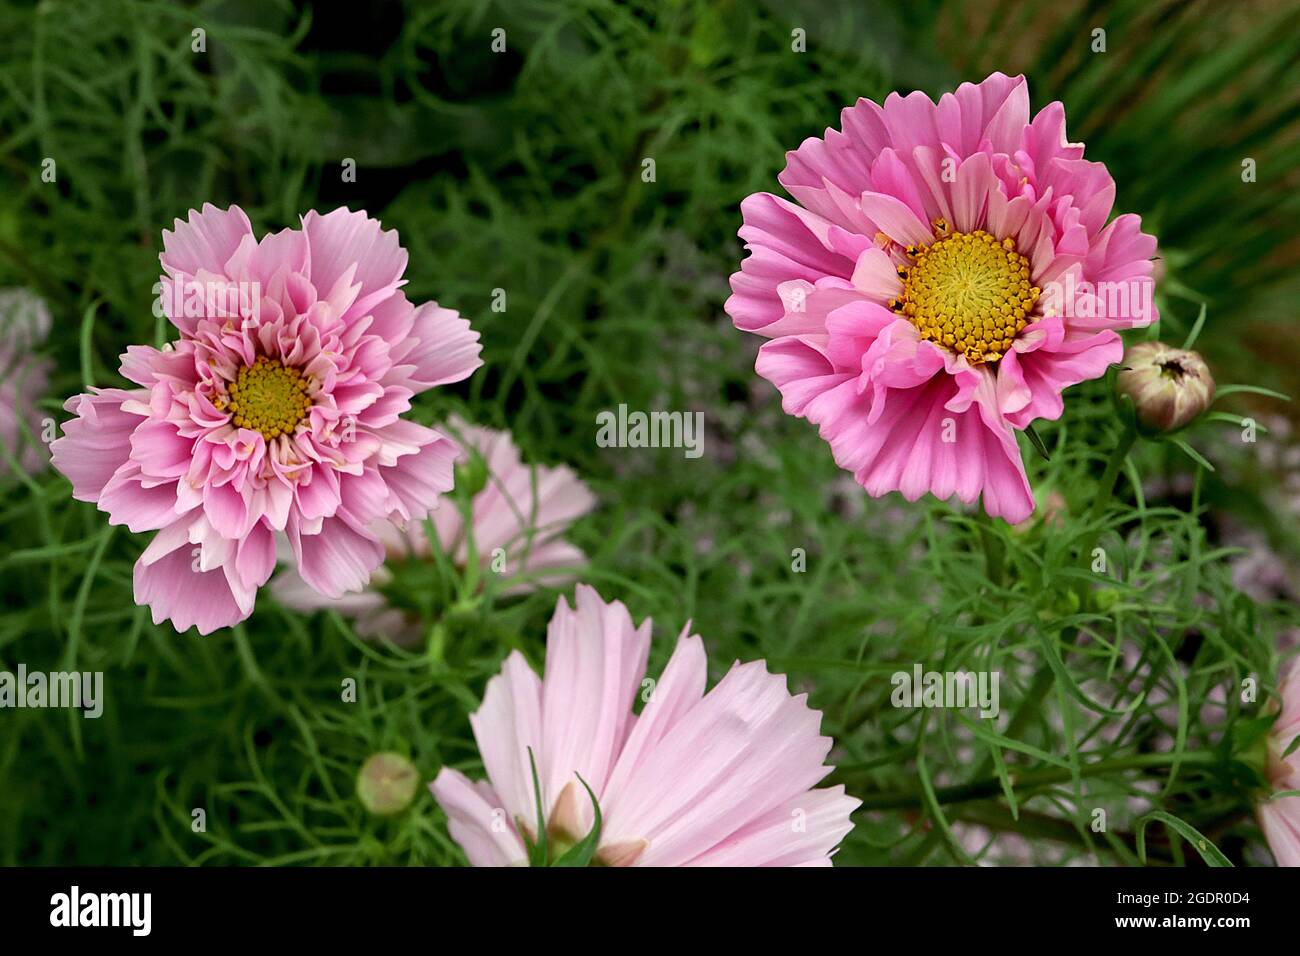 Cosmos bipinnatus ‘Double Click Mix’ double medium pink bowl-shaped flowers with tubular florets and feathery leaves, July, England, UK Stock Photo